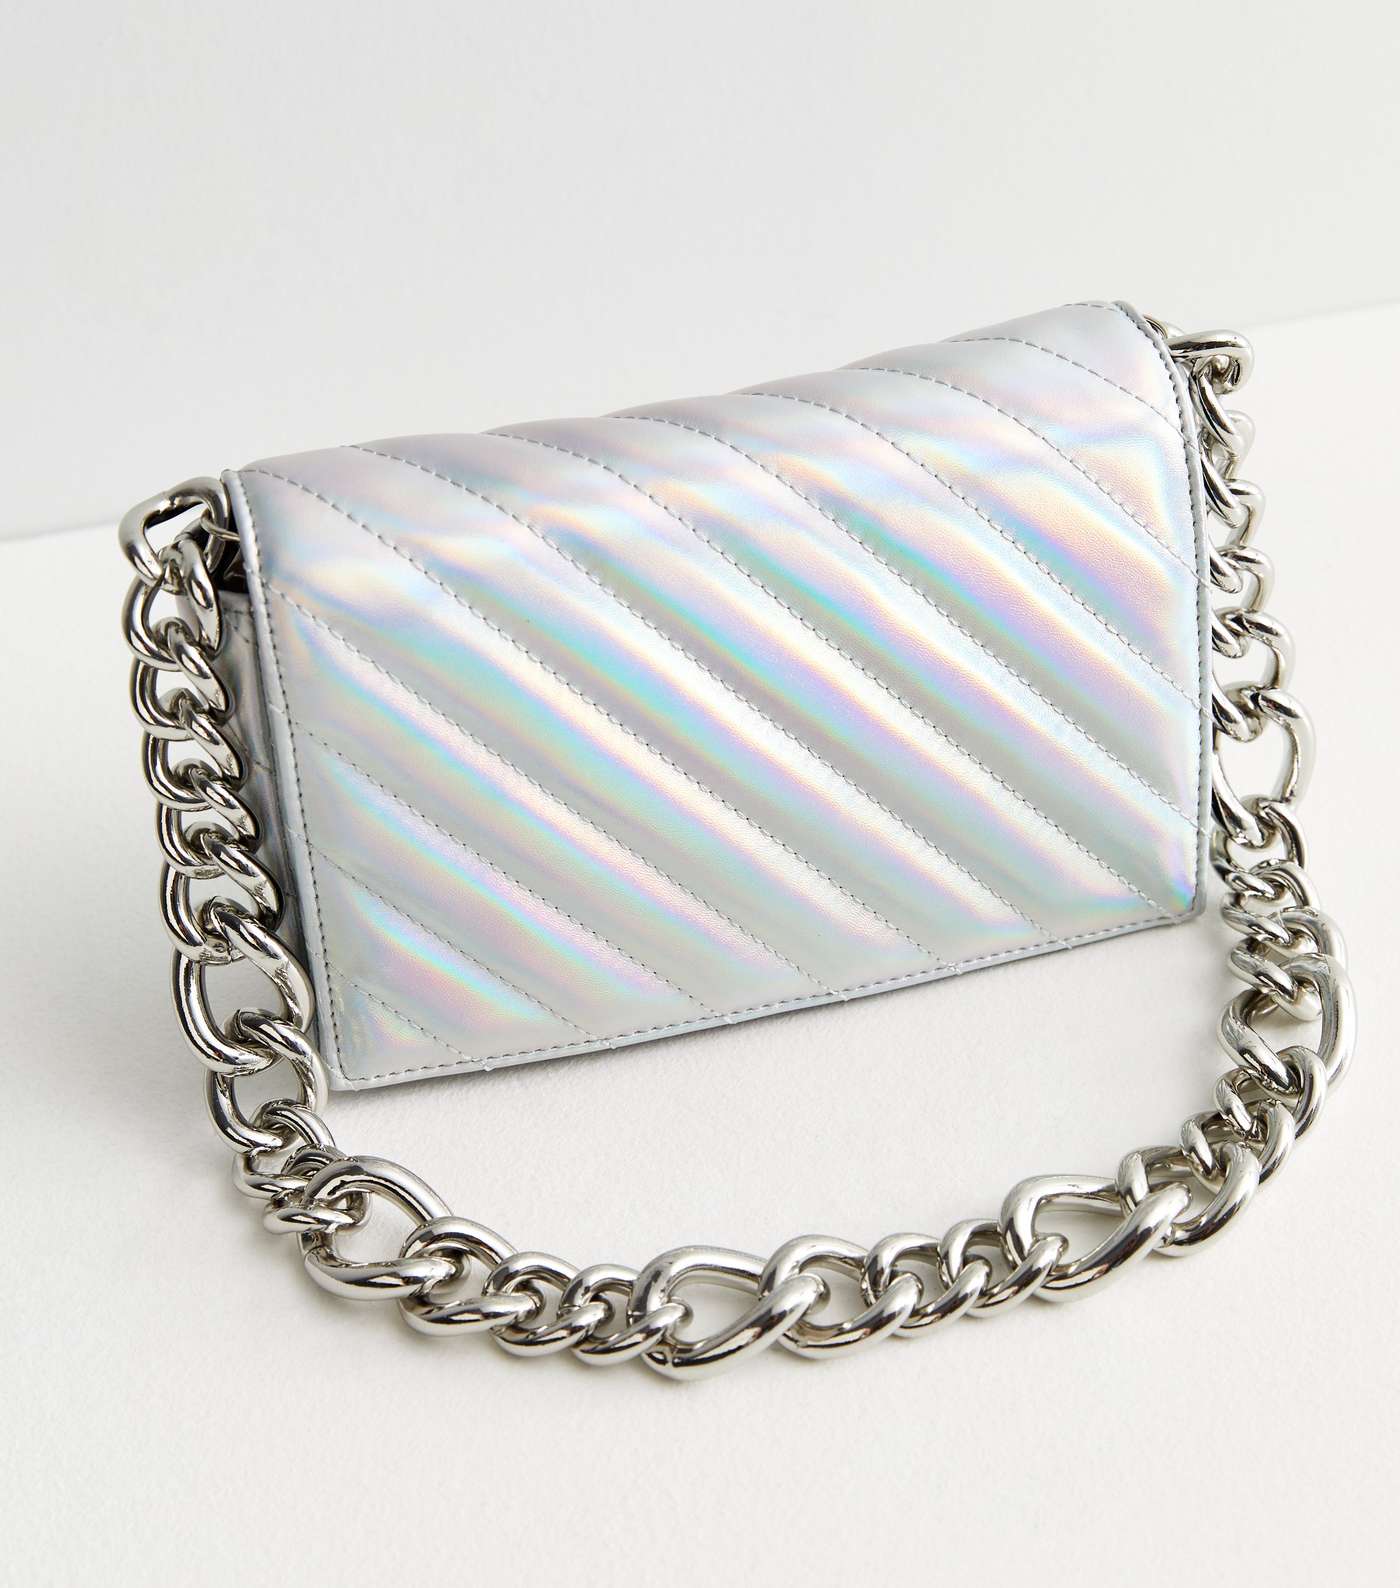 Silver Metallic Quilted Chain Shoulder Bag Image 3